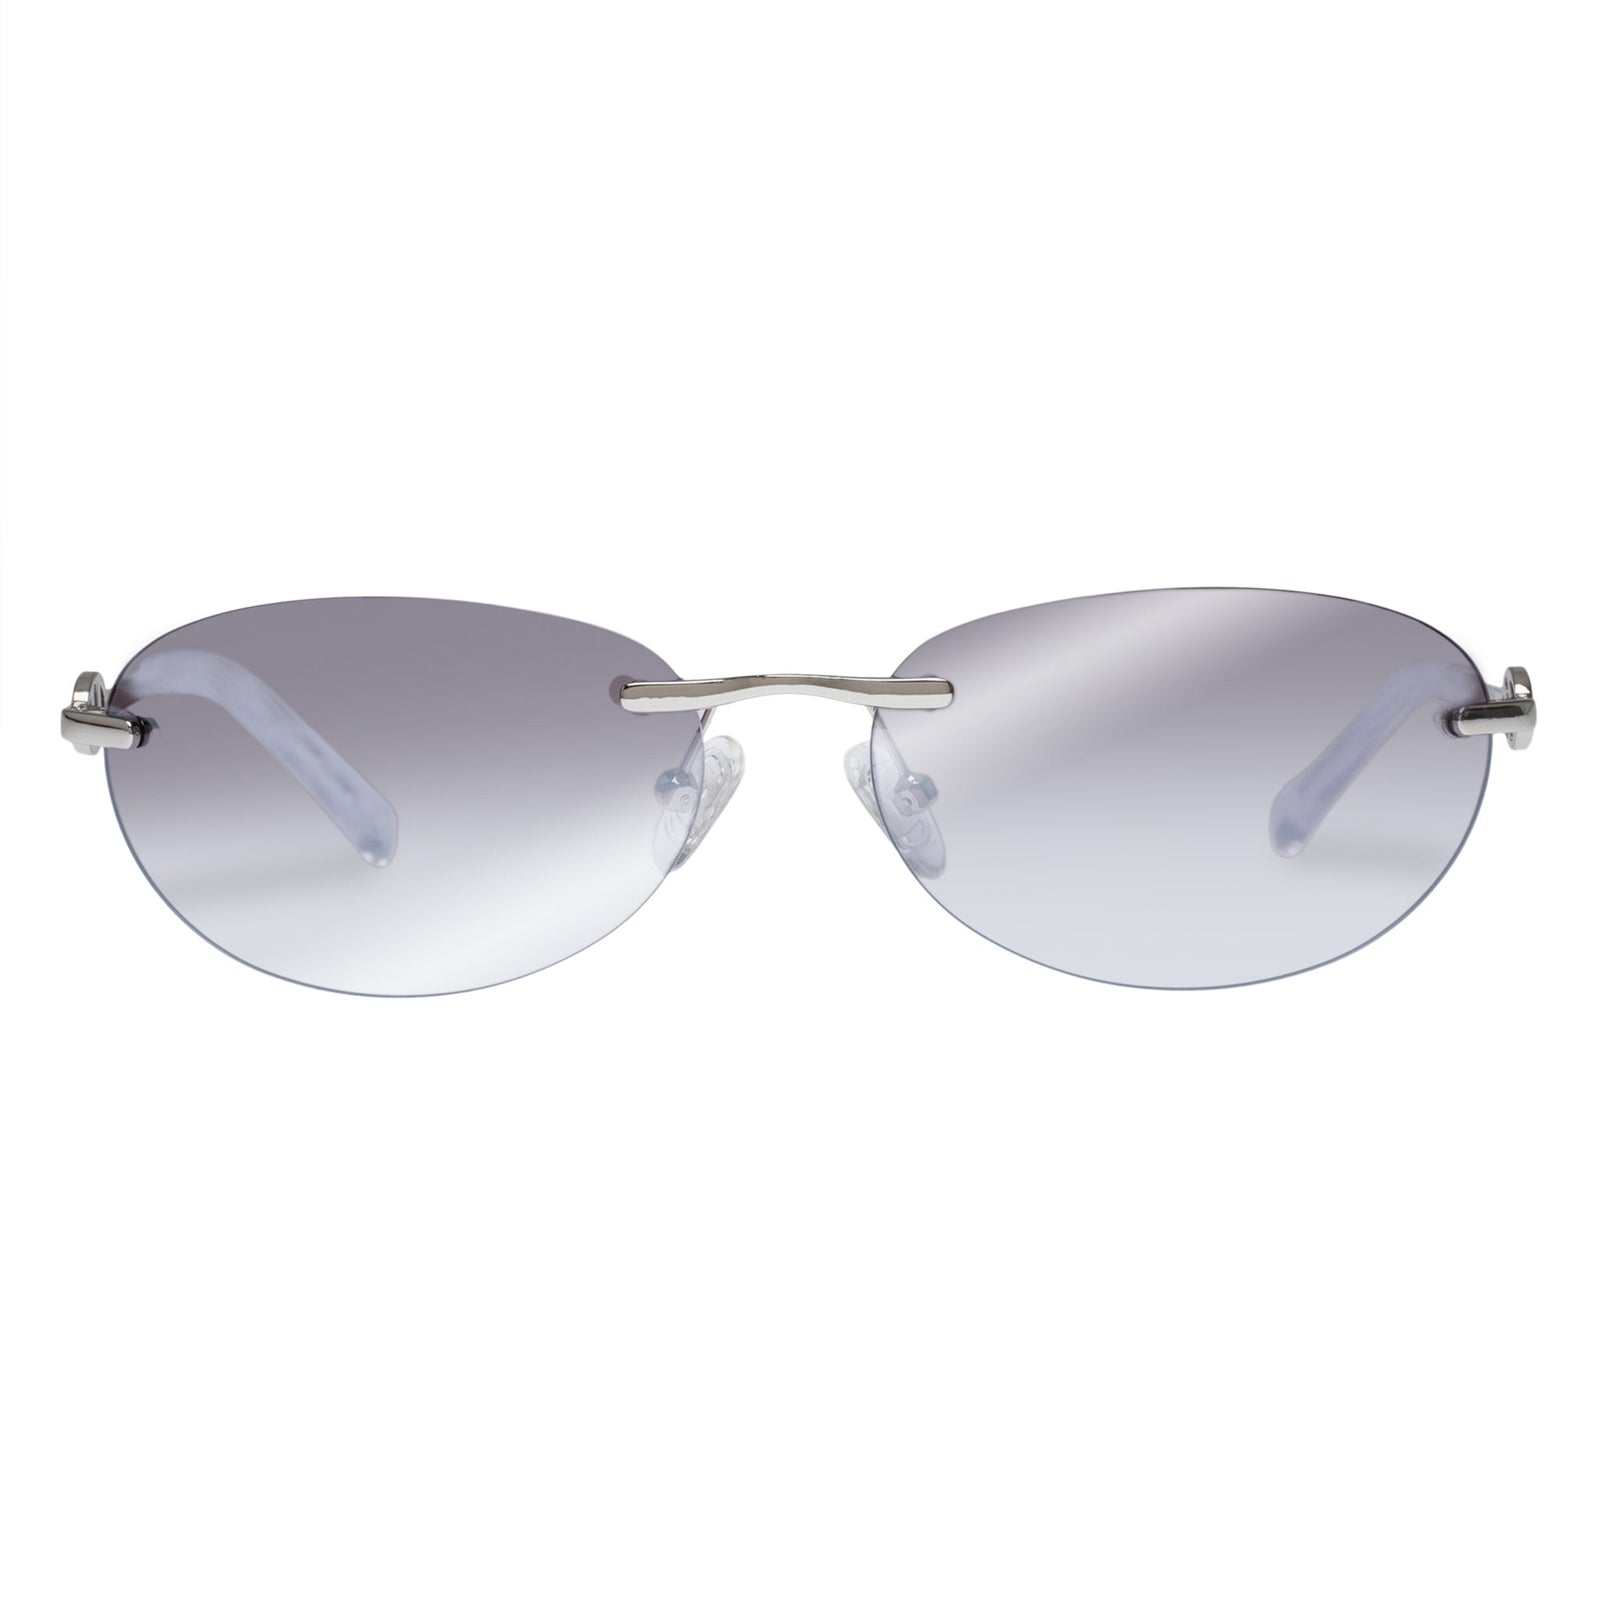 Vintage Inspired Grey Mask Rimless Sunglasses Mens For Men And